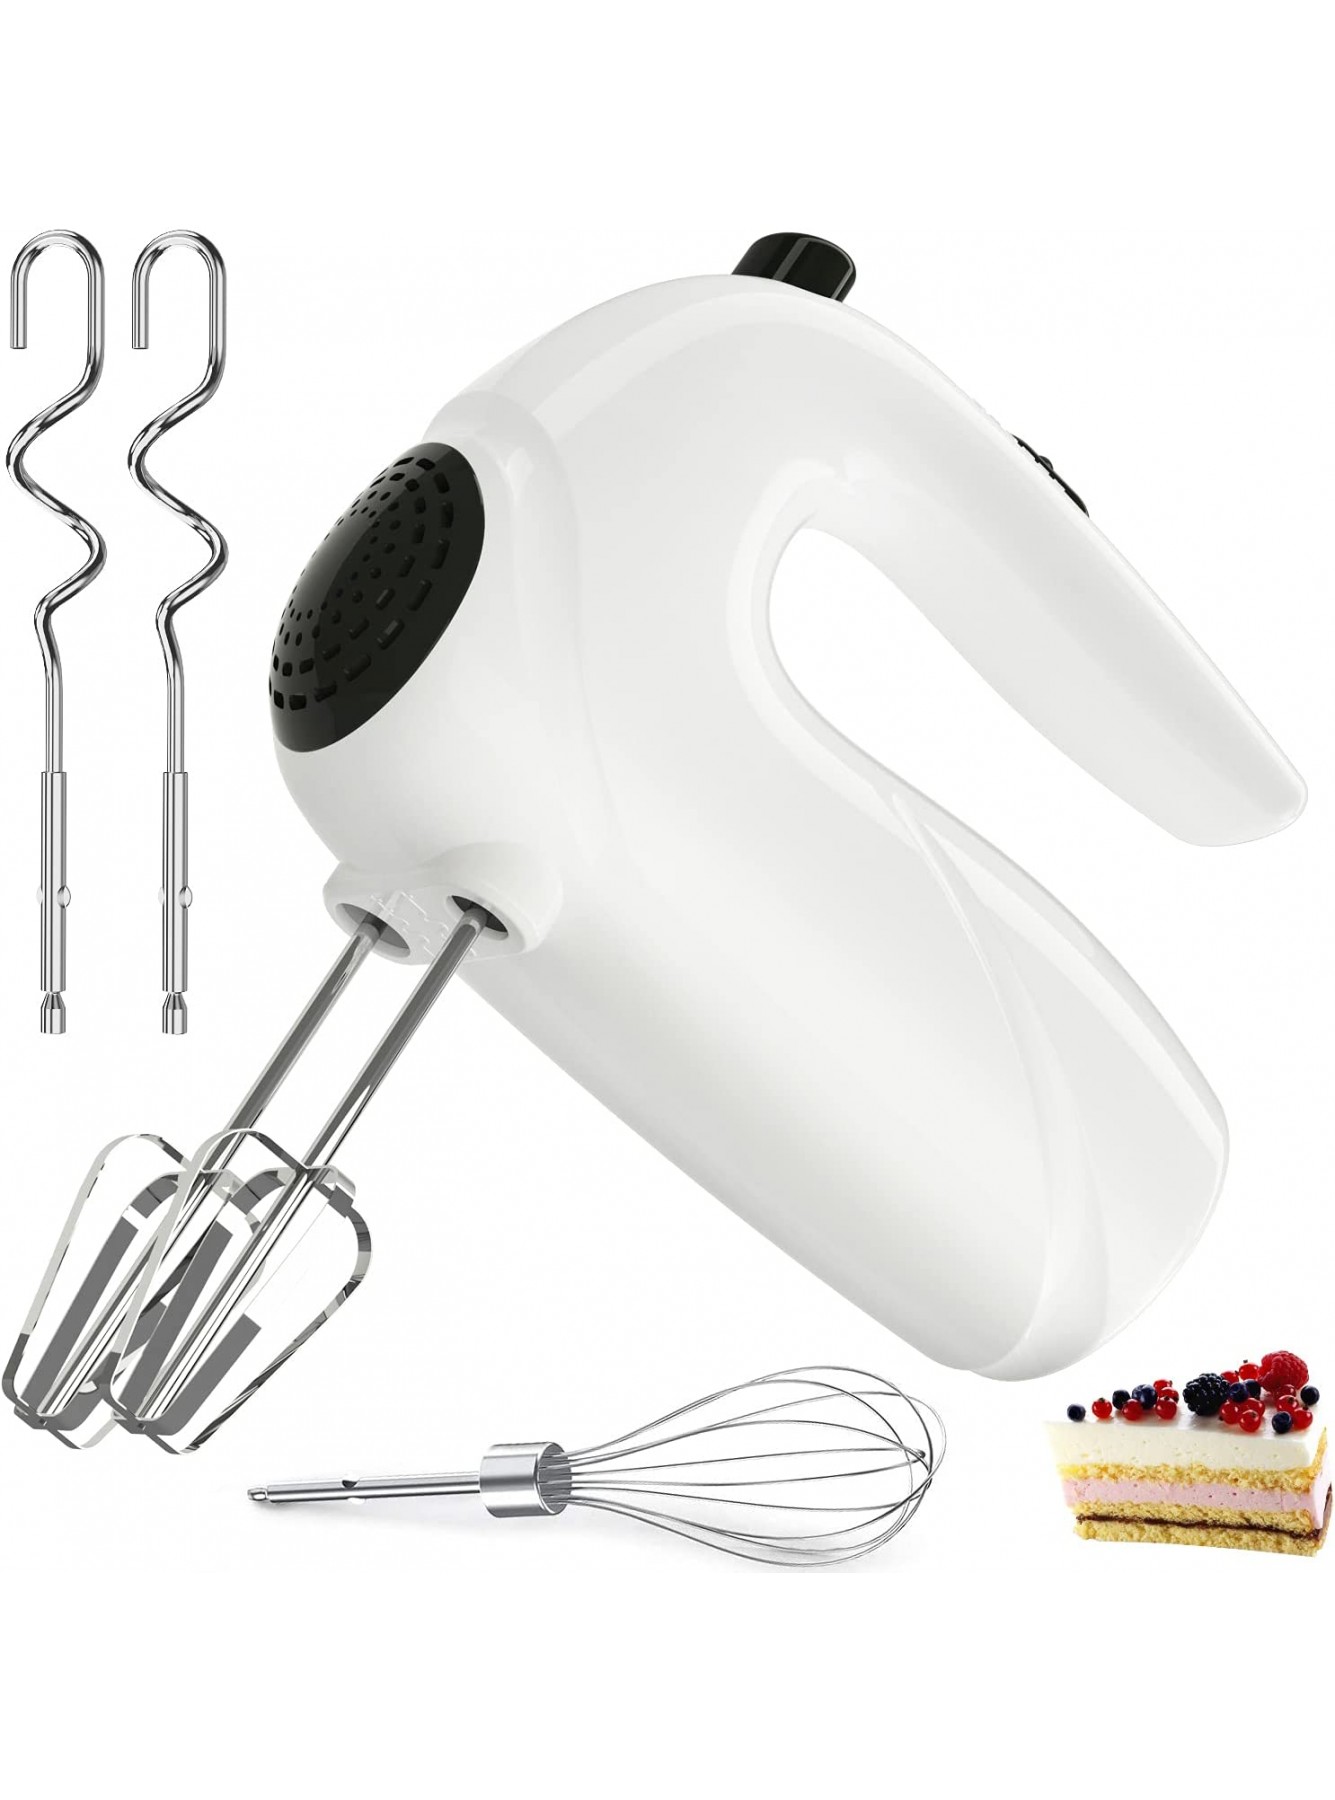 Hand Mixer Electric 120W Handheld Mixer 5 Speeds for Baking Cake Egg Cream Food Beater Turbo Boost Self-Control Speed + 5 Speed + Eject Button + 5 Stainless Steel Accessories B08ZCMV9LC